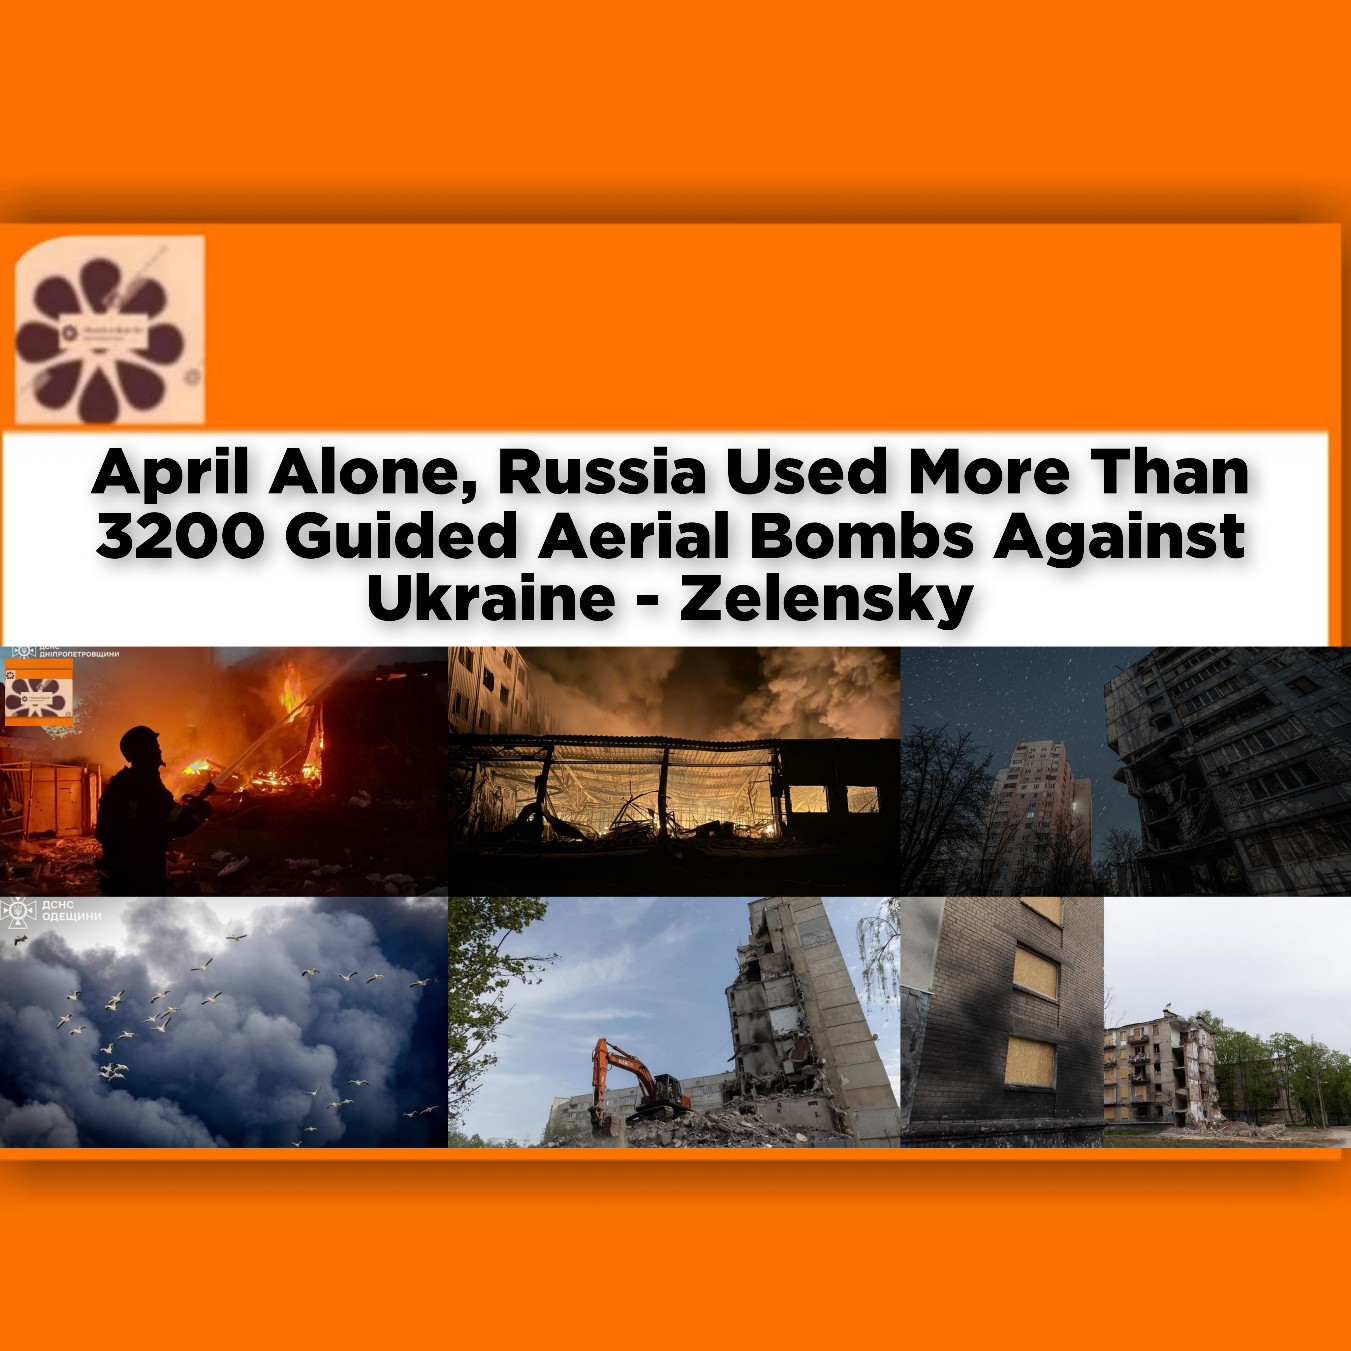 April Alone, Russia Used More Than 3200 Guided Aerial Bombs Against Ukraine - Zelensky ~ OsazuwaAkonedo #Goodwin